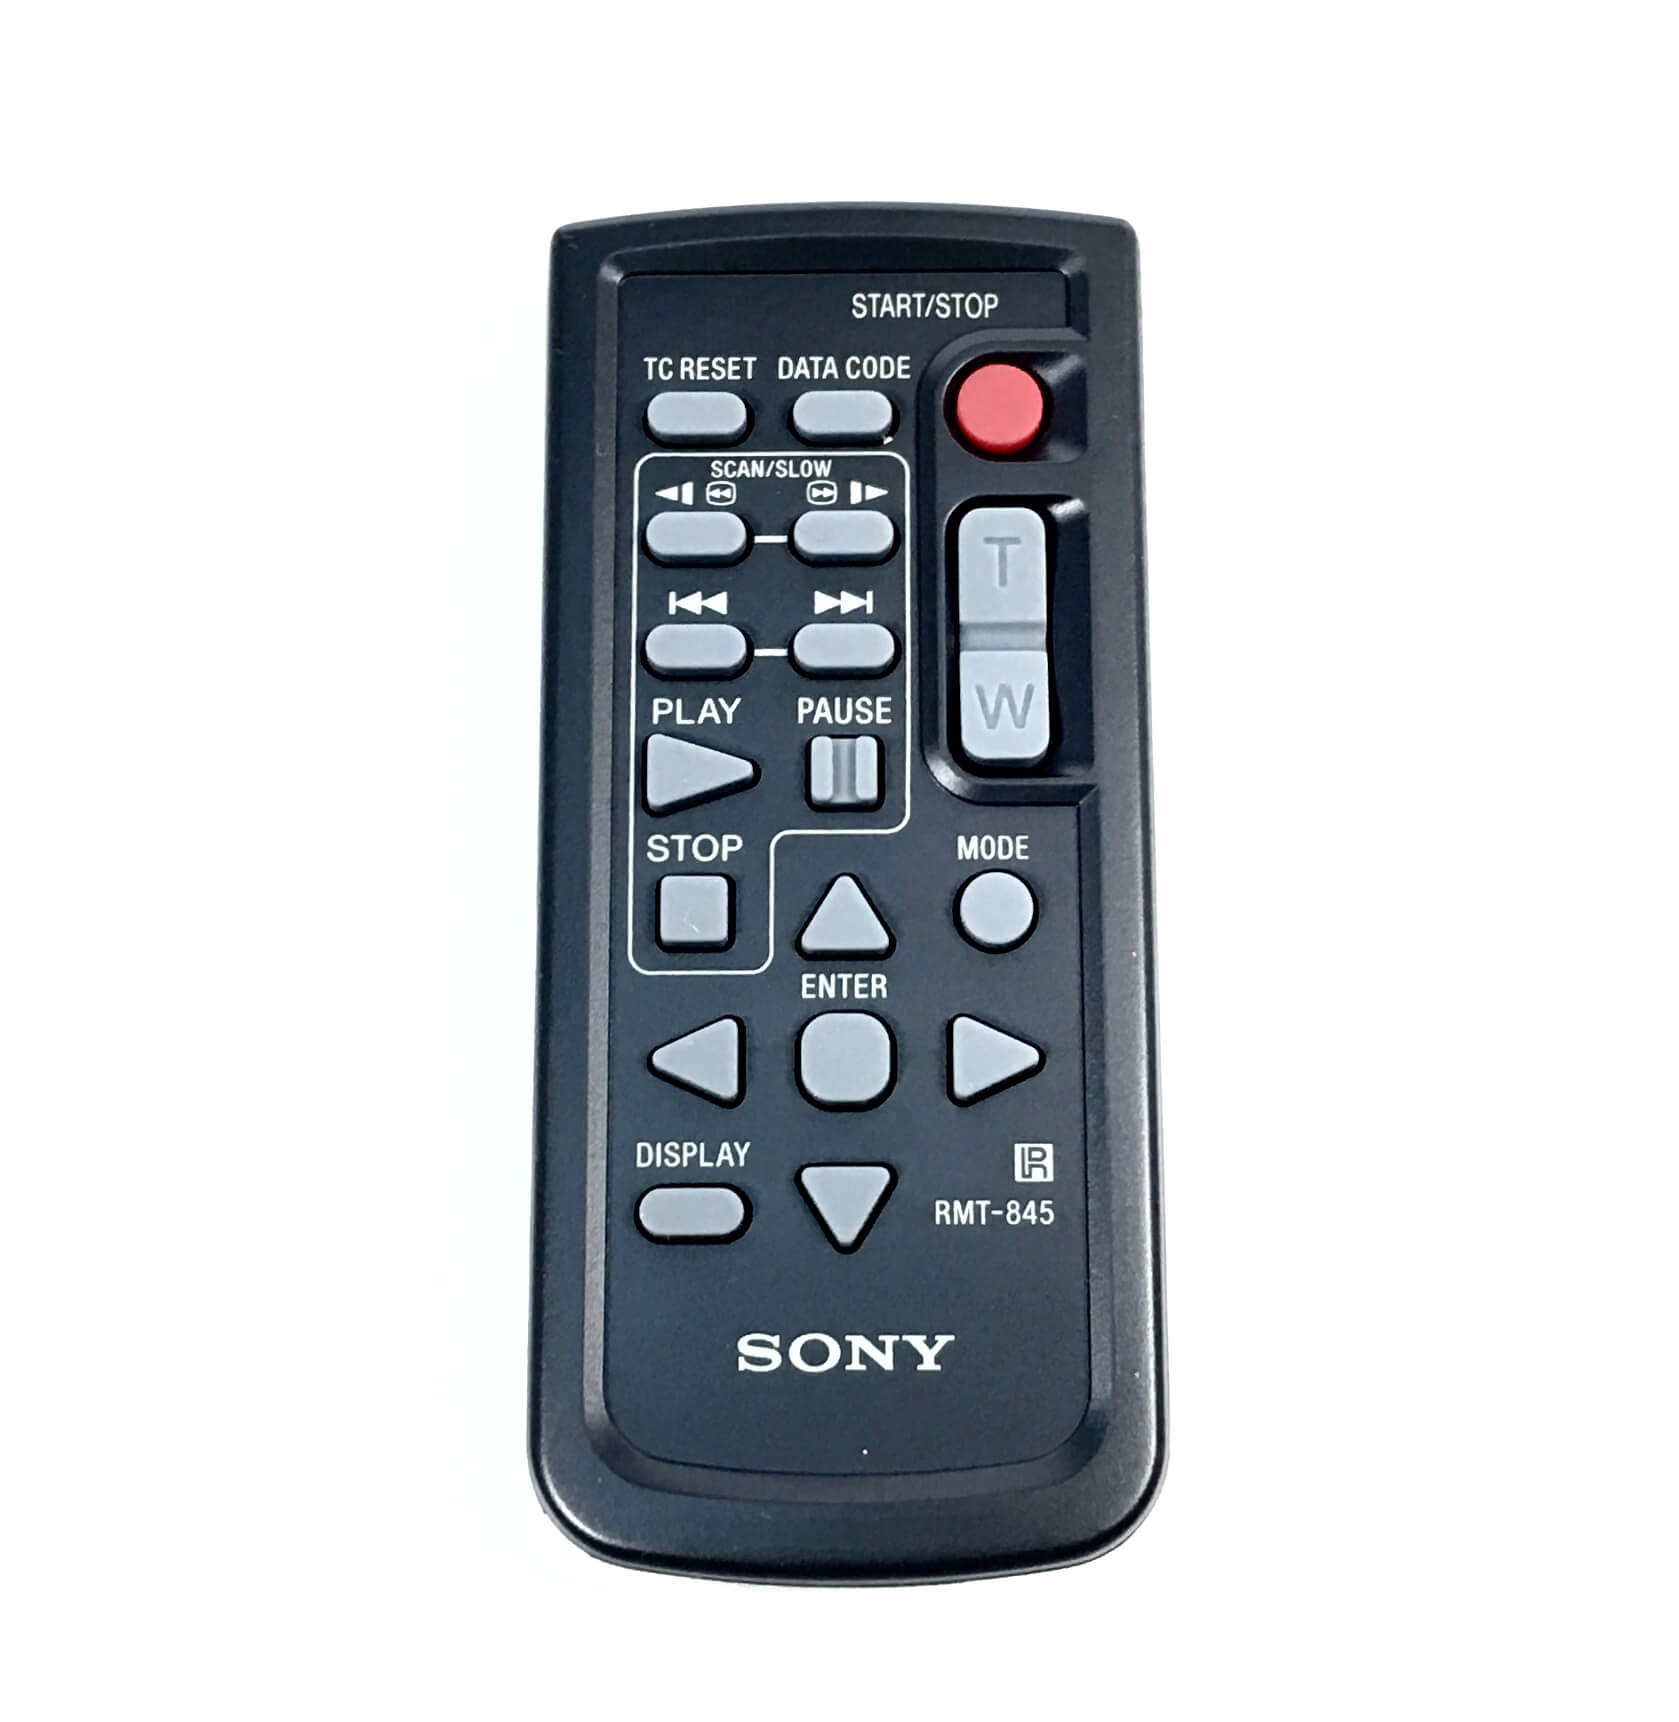 Original wireless remote control that came with the Sony HXR-NX5u camcorder. It is a genuine Sony part, sourced directly from Sony USA. Brand new factory fresh. Free Shipping.